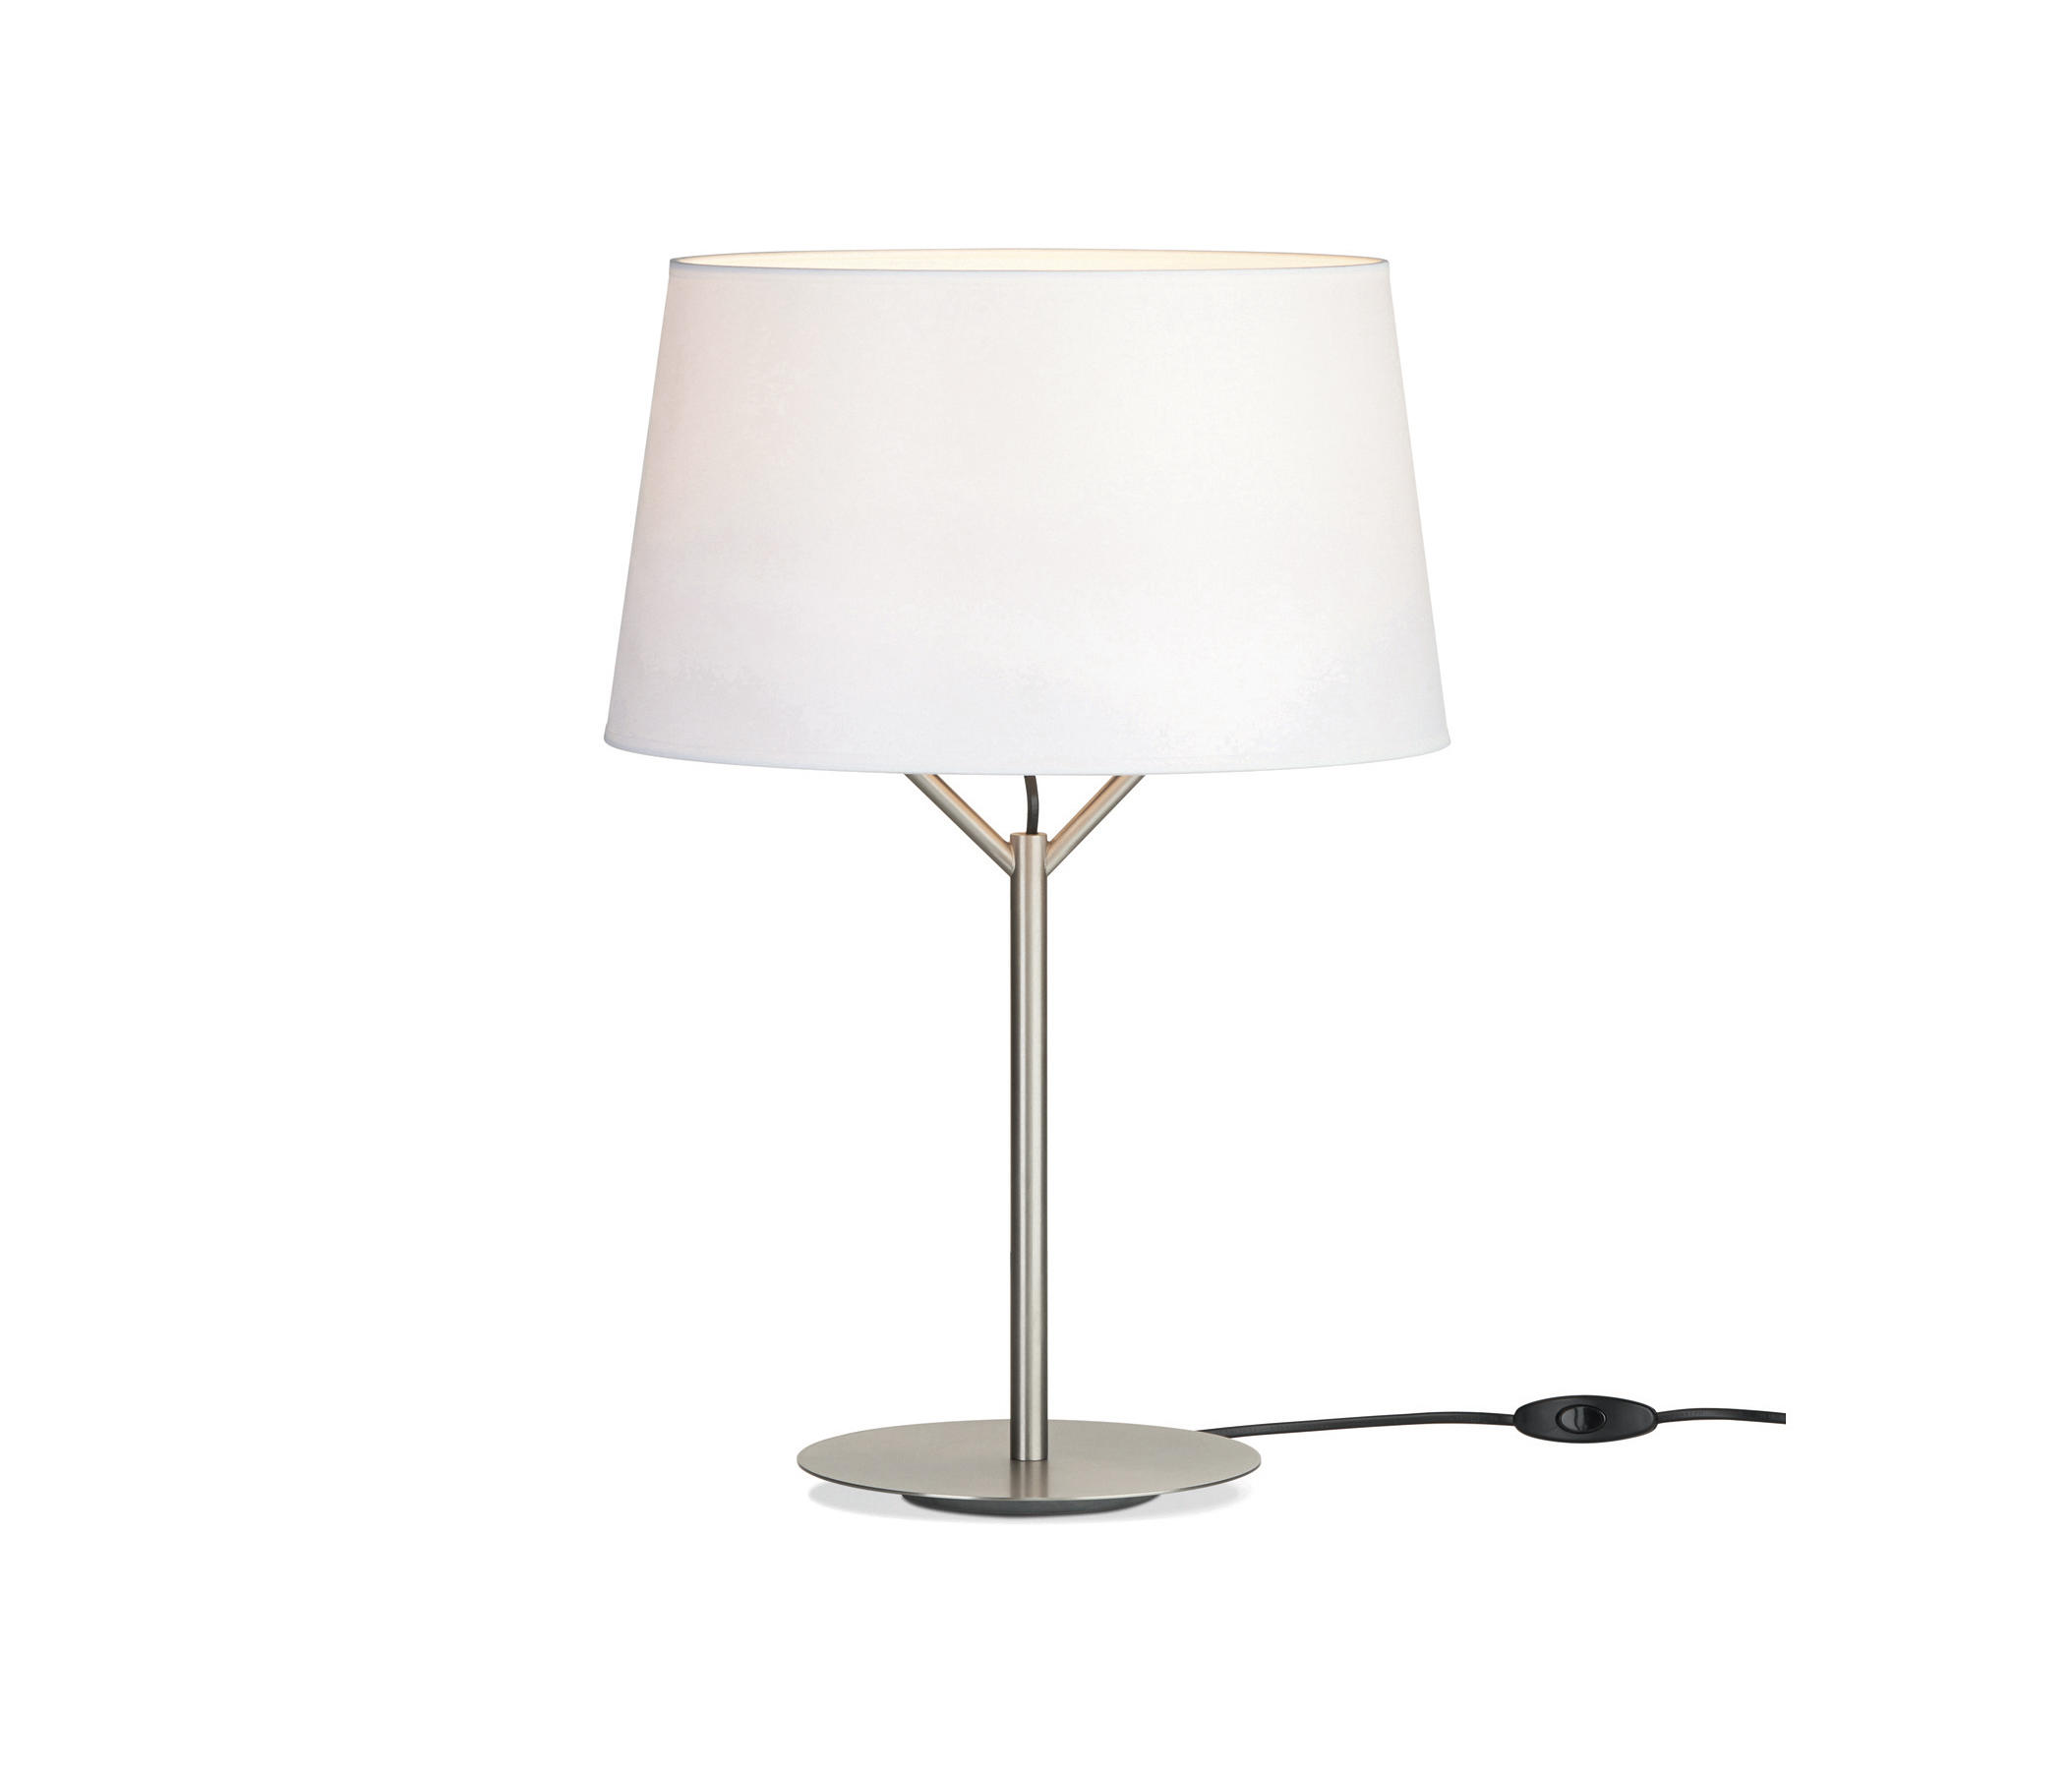 Jerry | Table lamp & designer furniture | Architonic